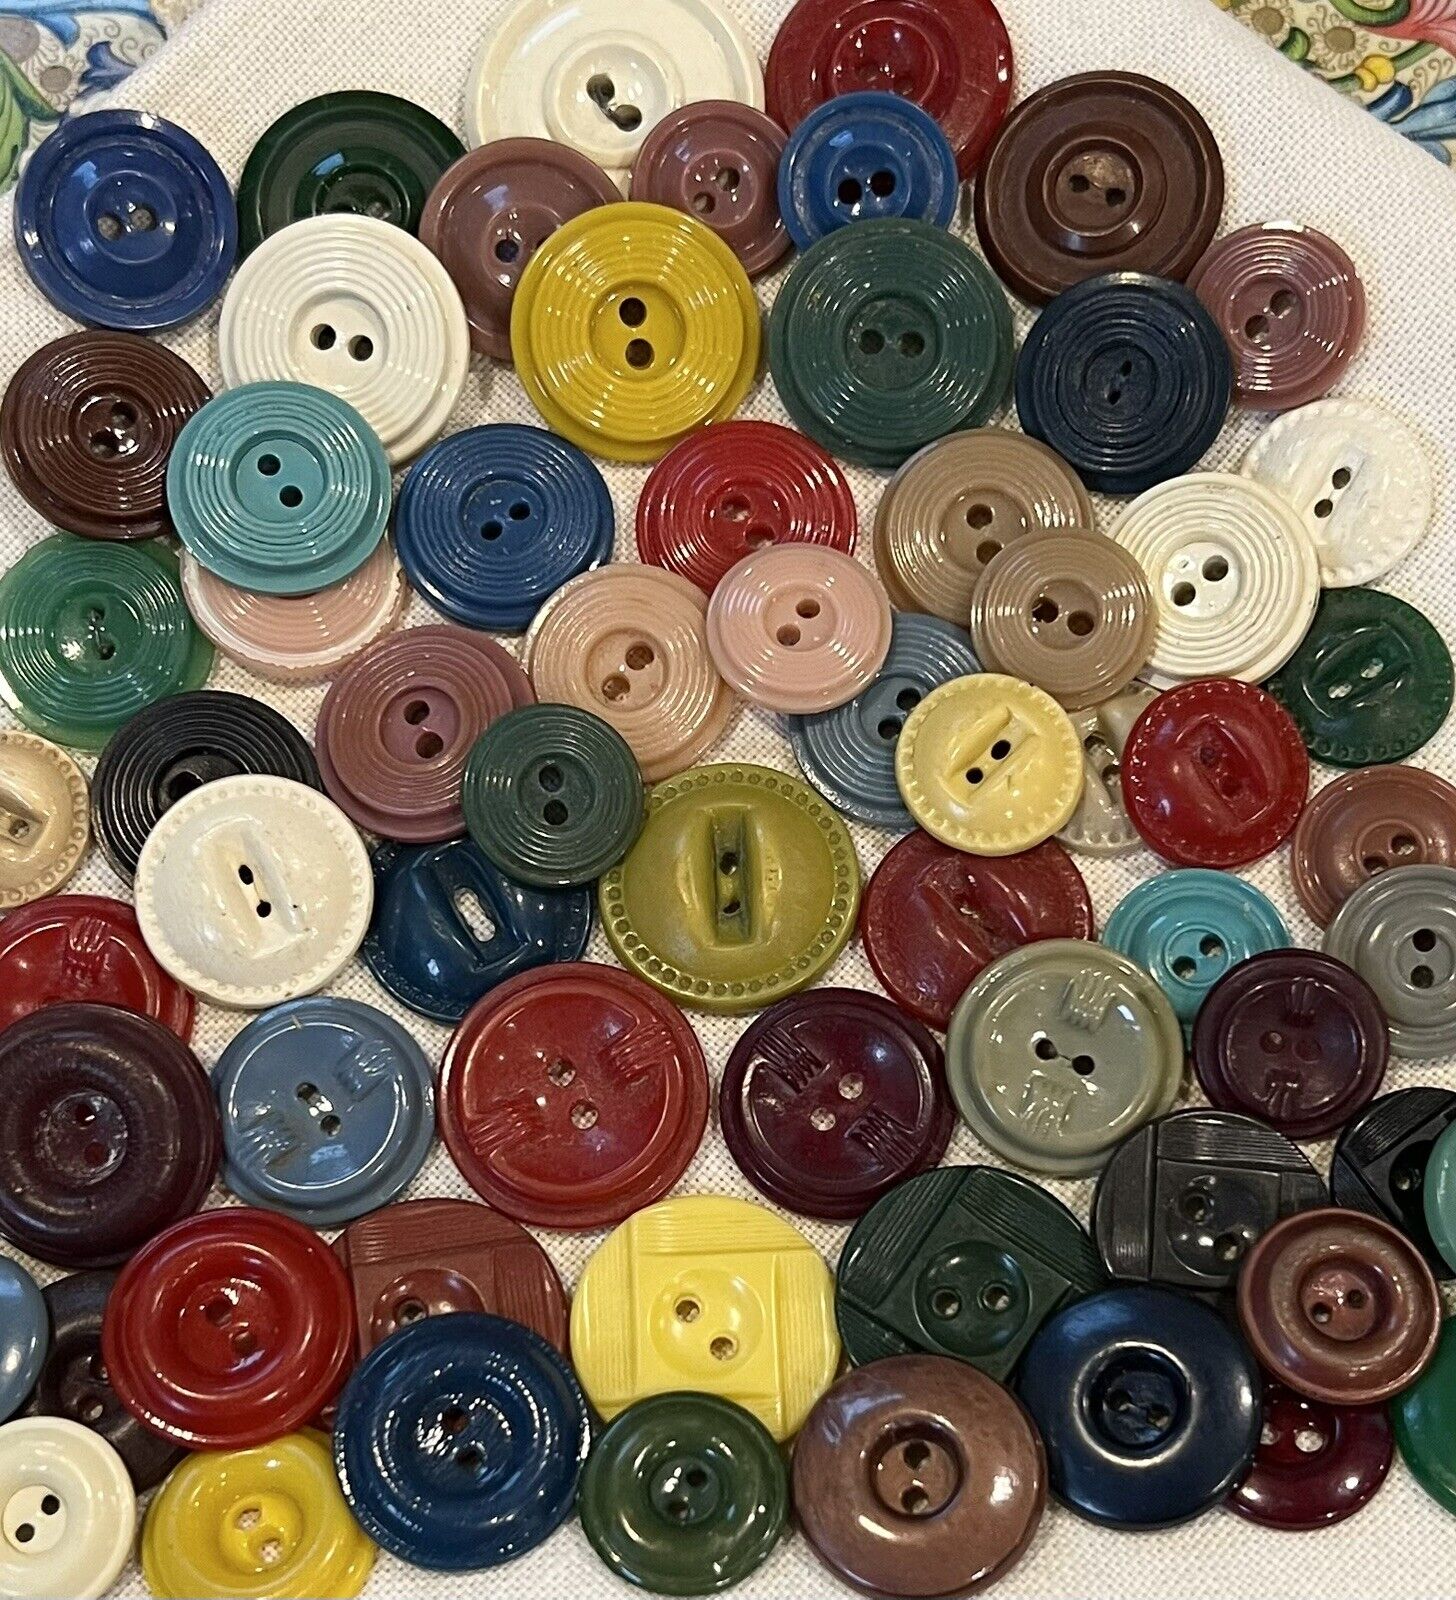 Vintage Old Colorful Celluloids Plastics 66 Buttons Lot Mixed Variety Sets